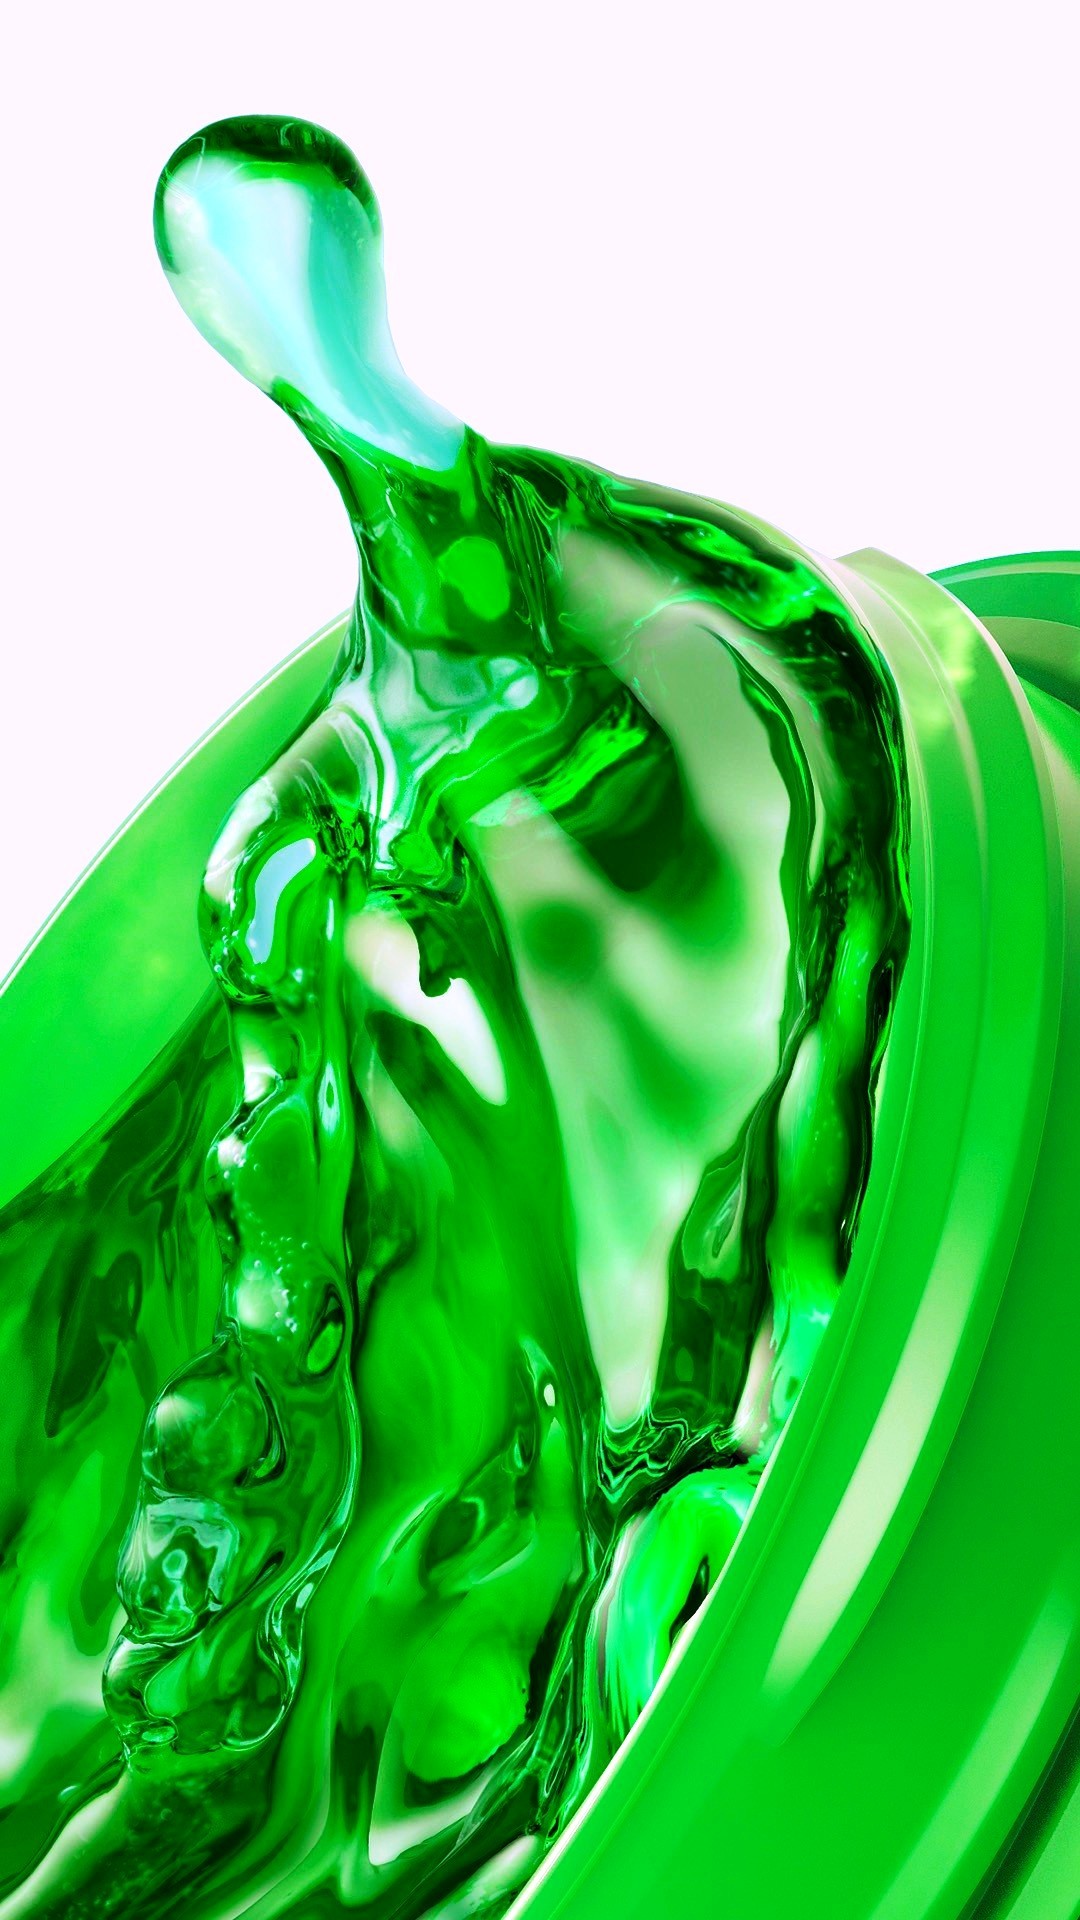 Liquid Images iPhone X Wallpaper HD With high-resolution 1080X1920 pixel. Download all Mobile Wallpapers and Use them as wallpapers for your iPhone, Tablet, iPad, Android and other mobile devices